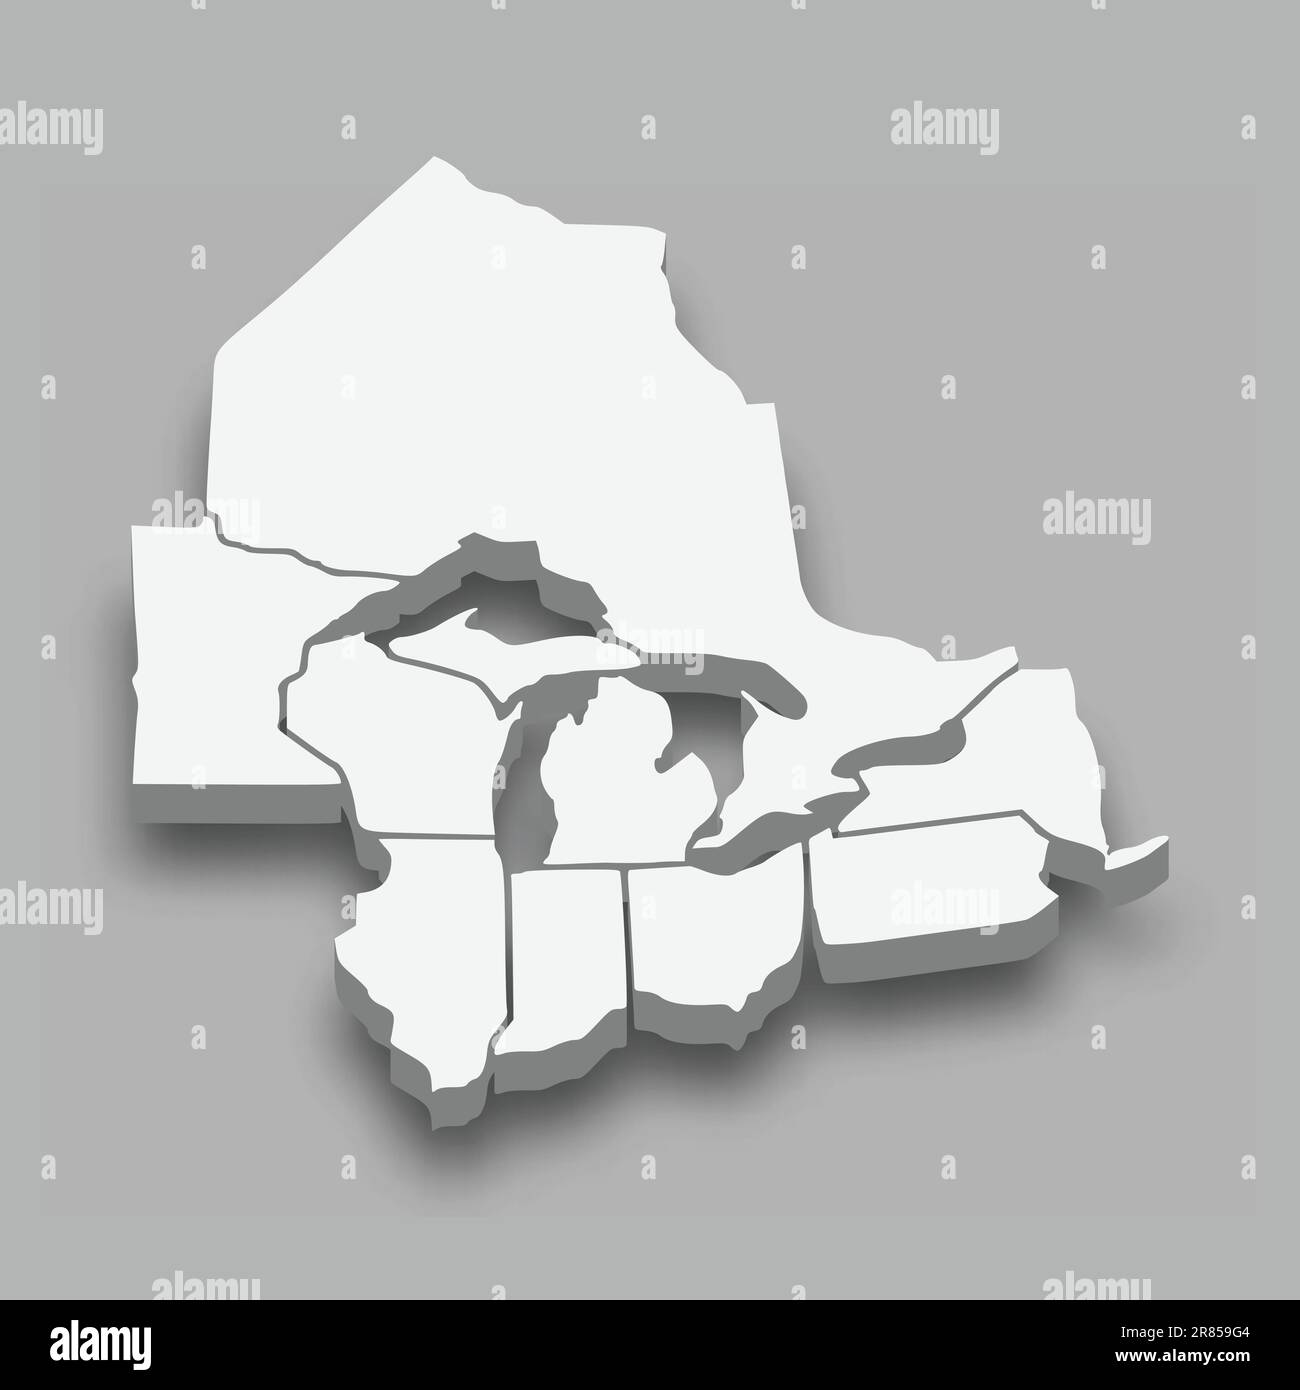 3d isometric map of Great Lakes region, isolated with shadow vector illustration Stock Vector